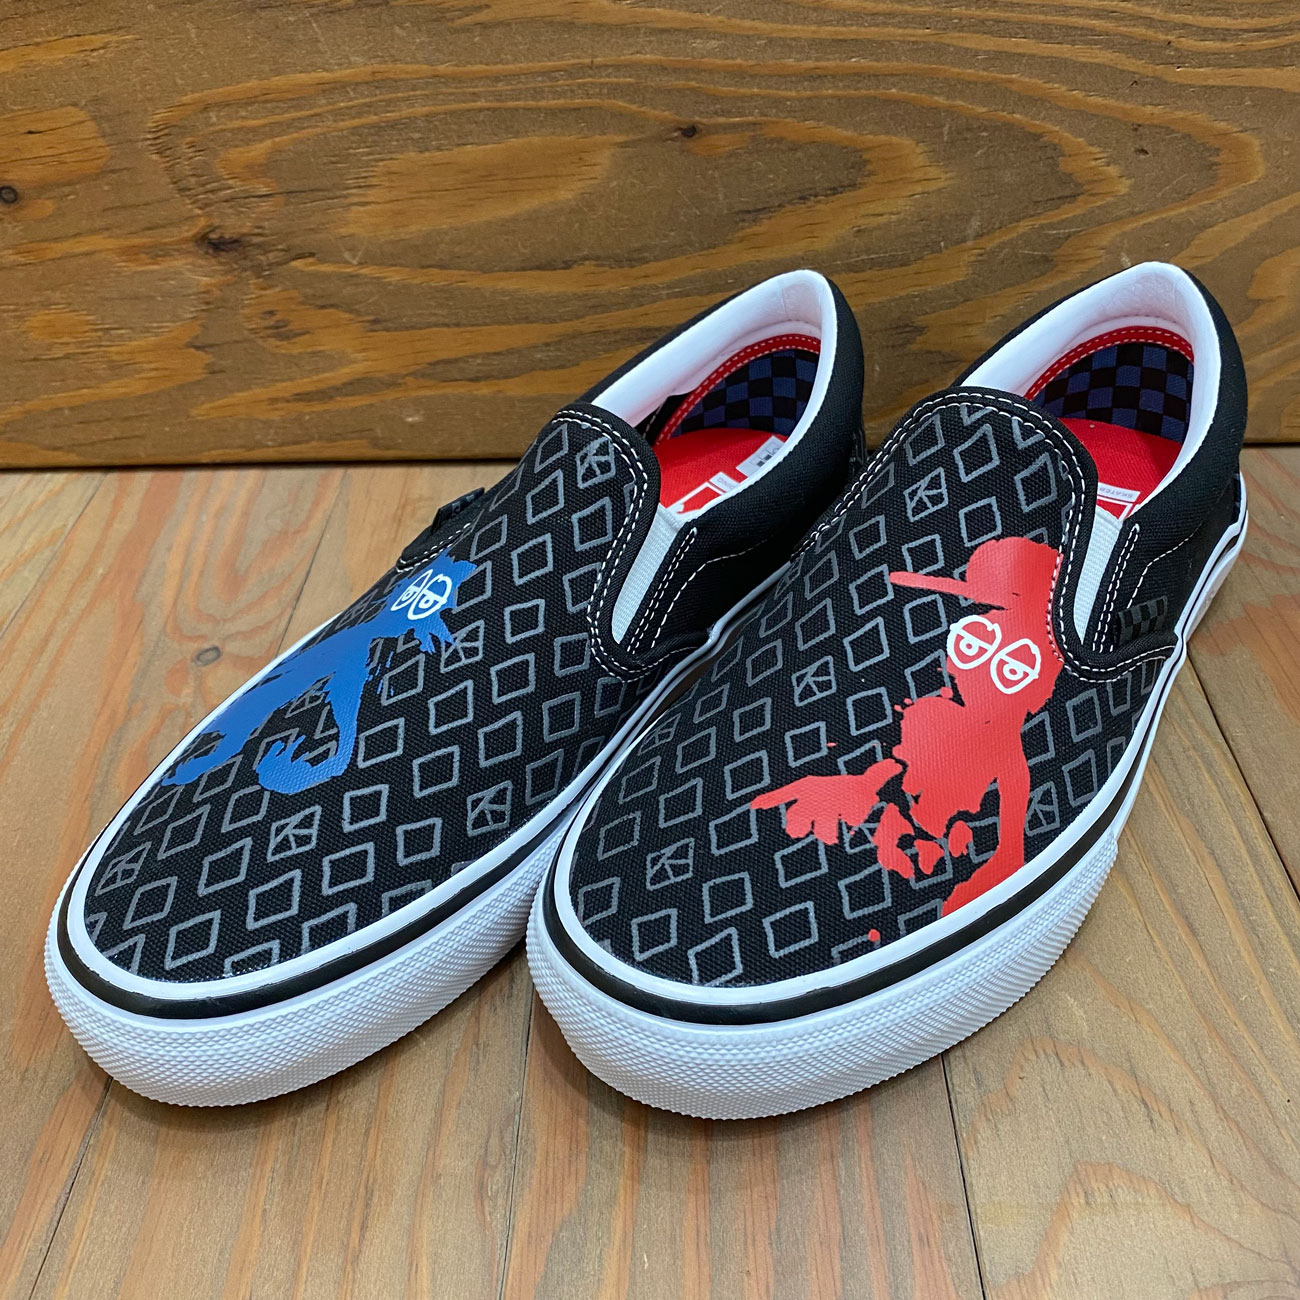 VANS SKATE SLIP-ON KROOKED BY NATAS FOR RAY